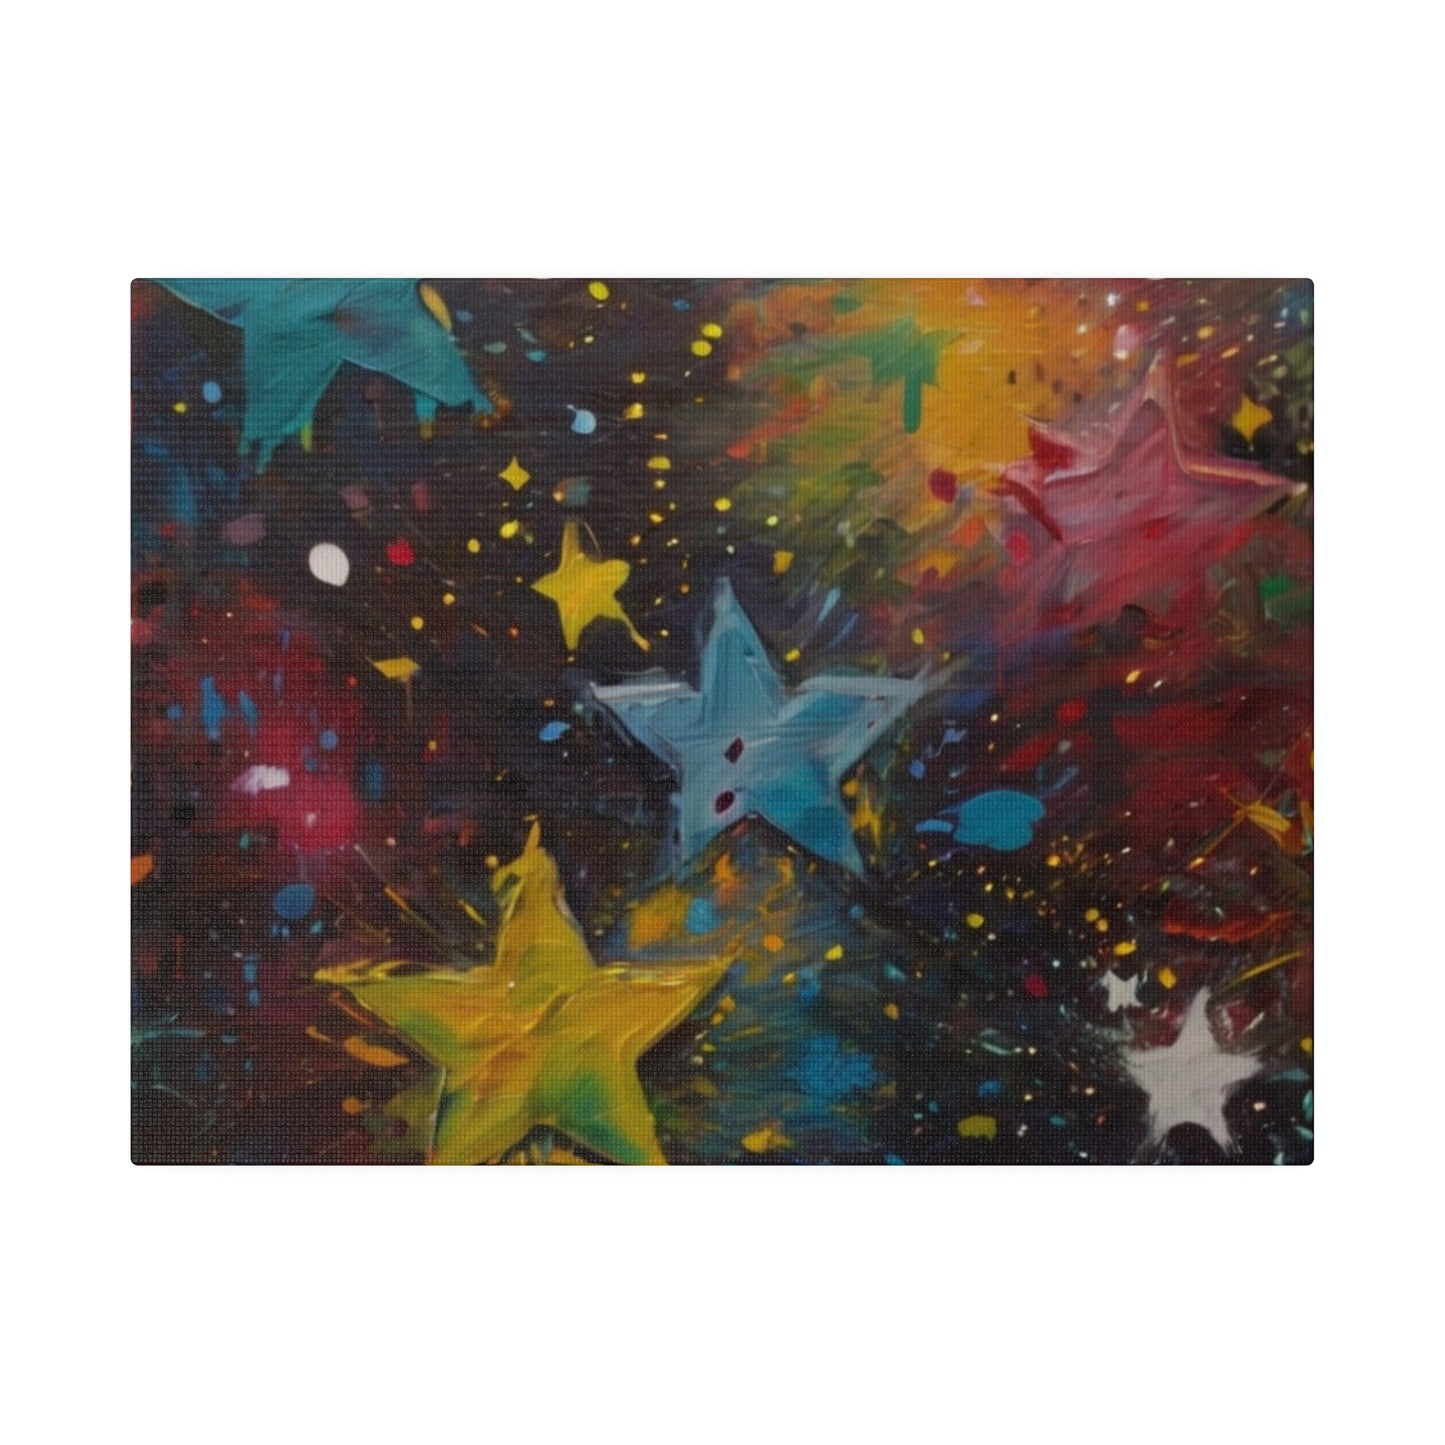 Messy Stars Painting - Matte Canvas, Stretched, 0.75"